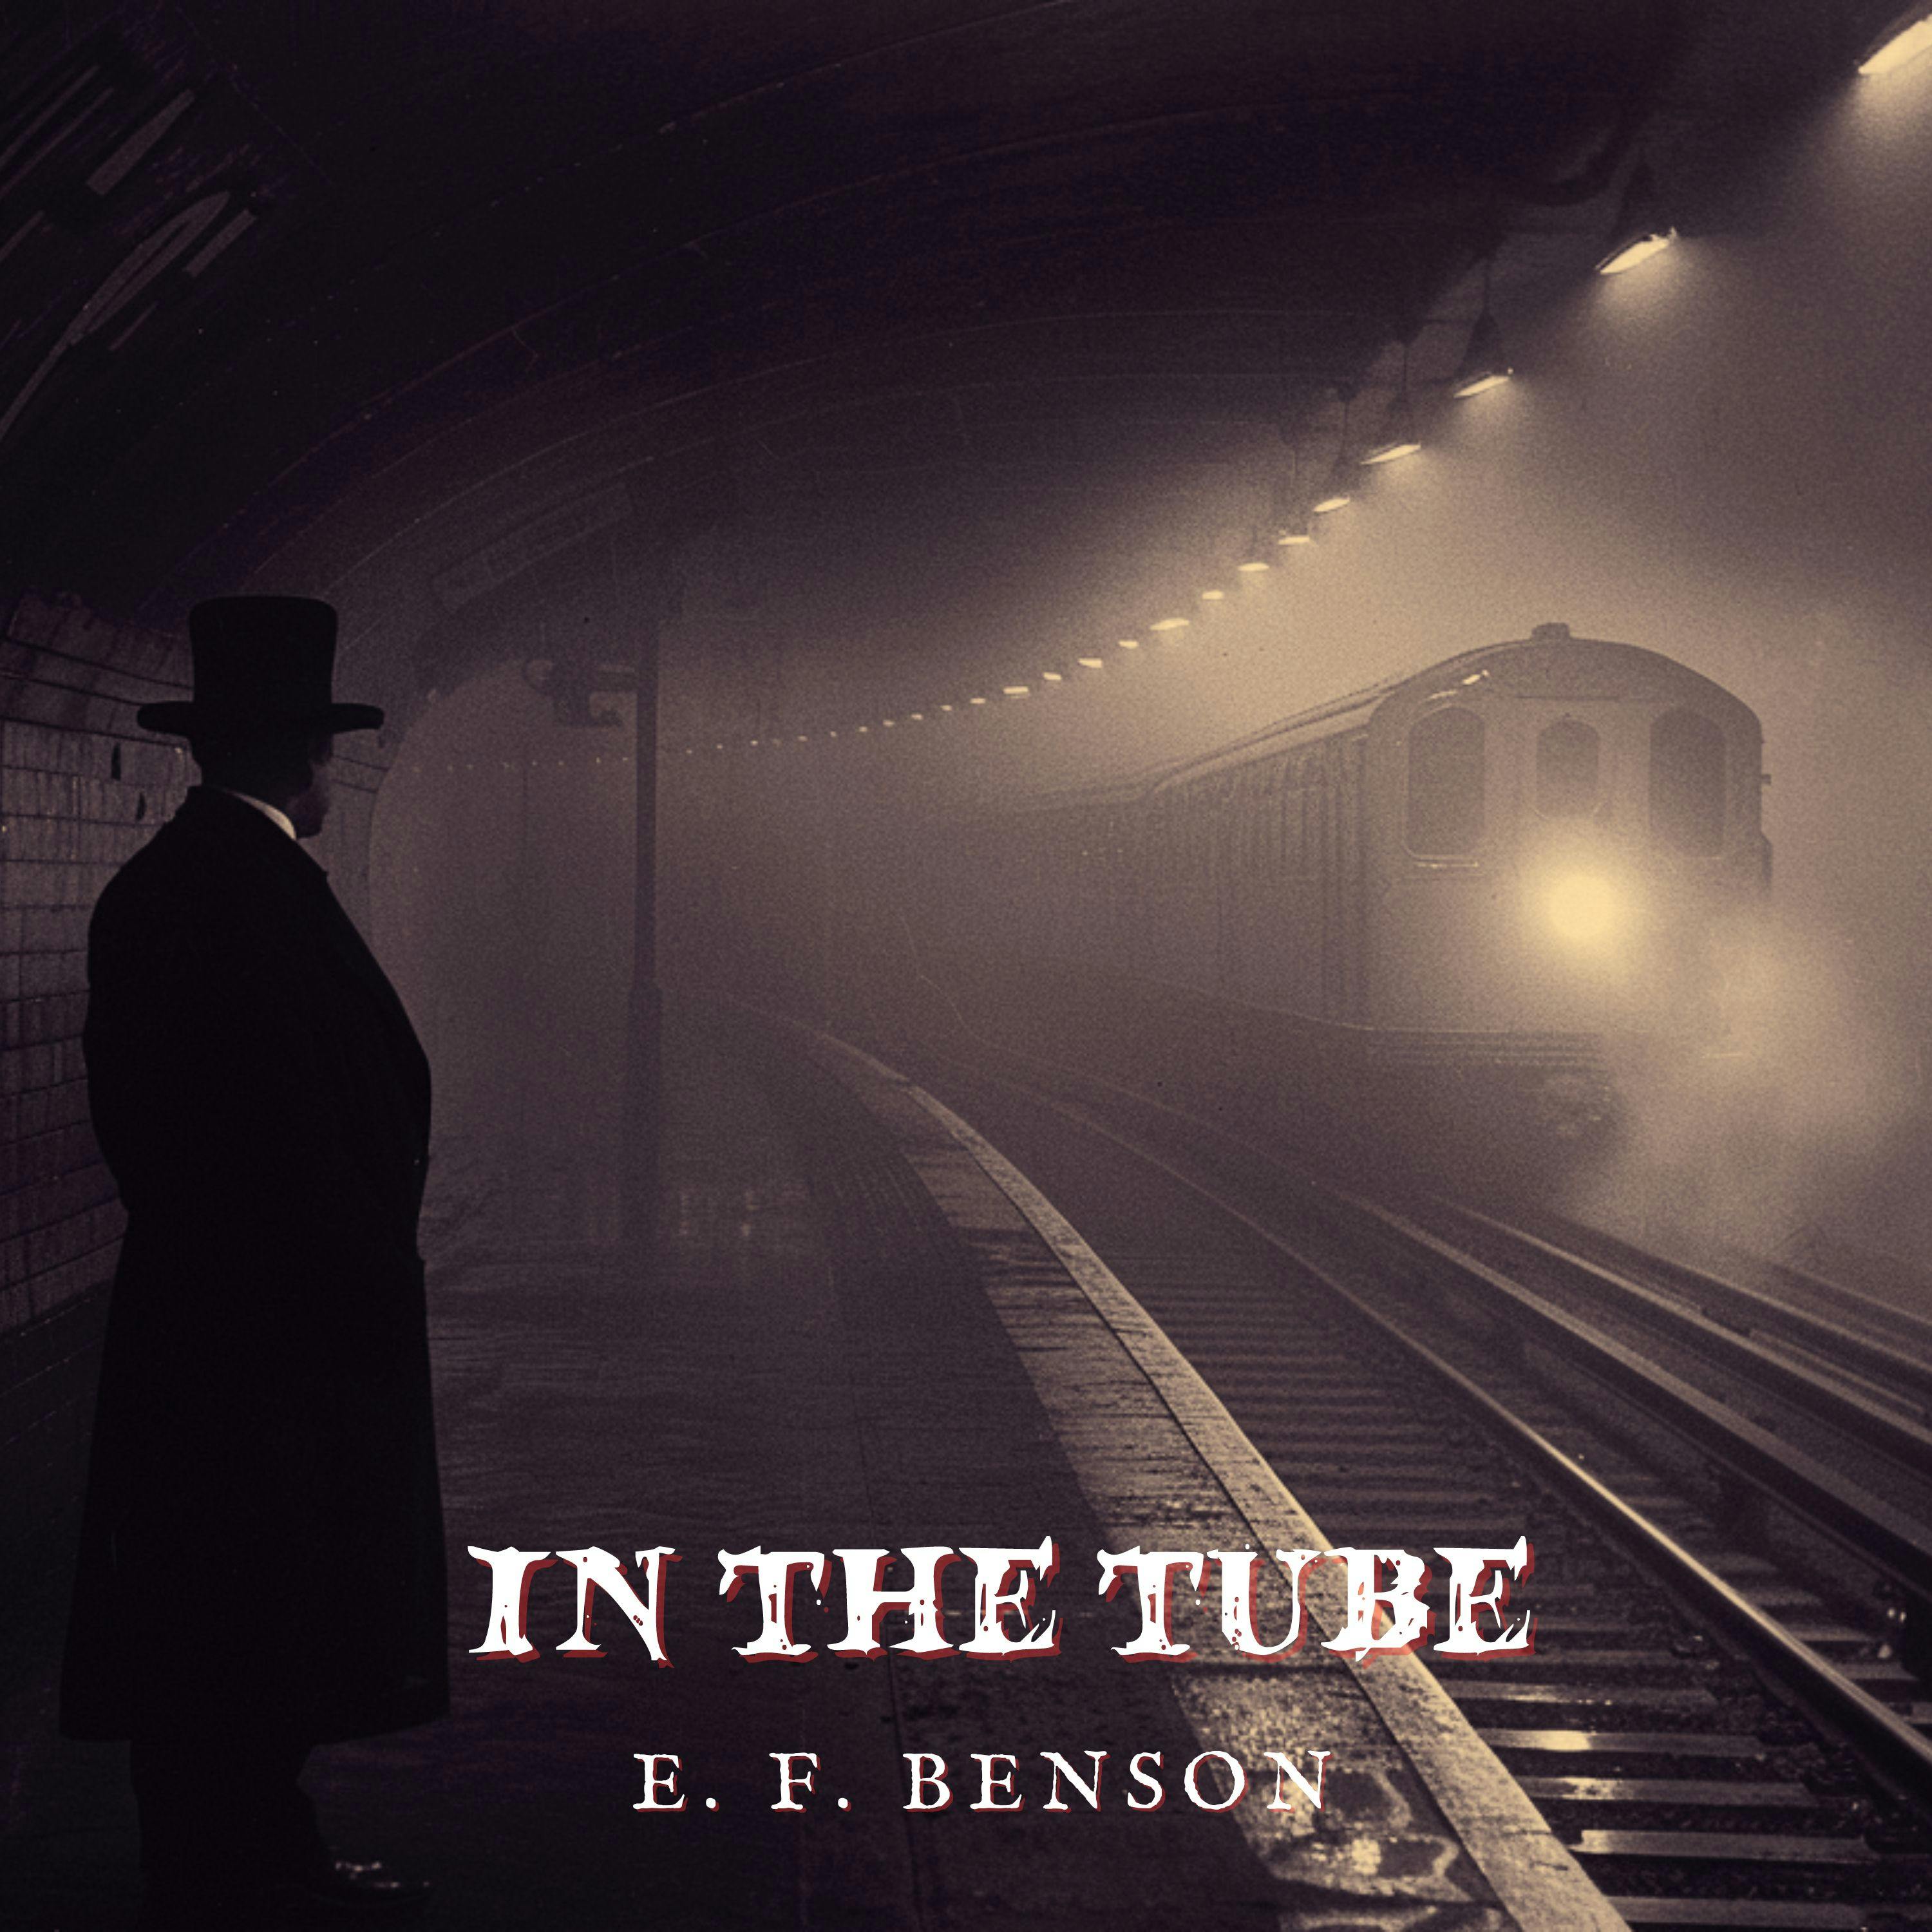 In The Tube by E. F. Benson